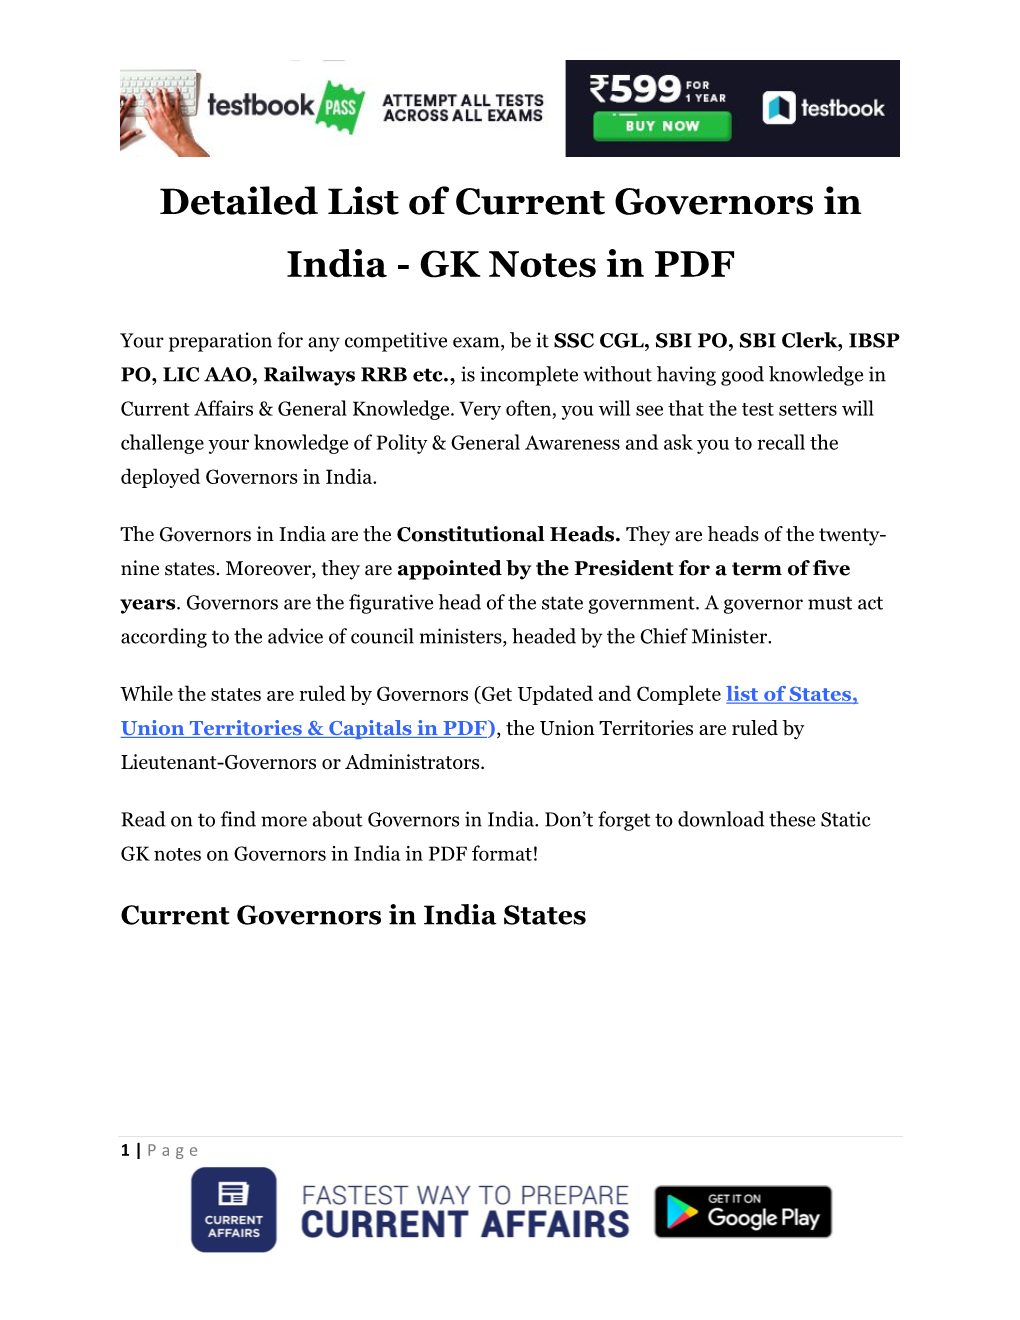 Detailed List of Current Governors in India - GK Notes in PDF